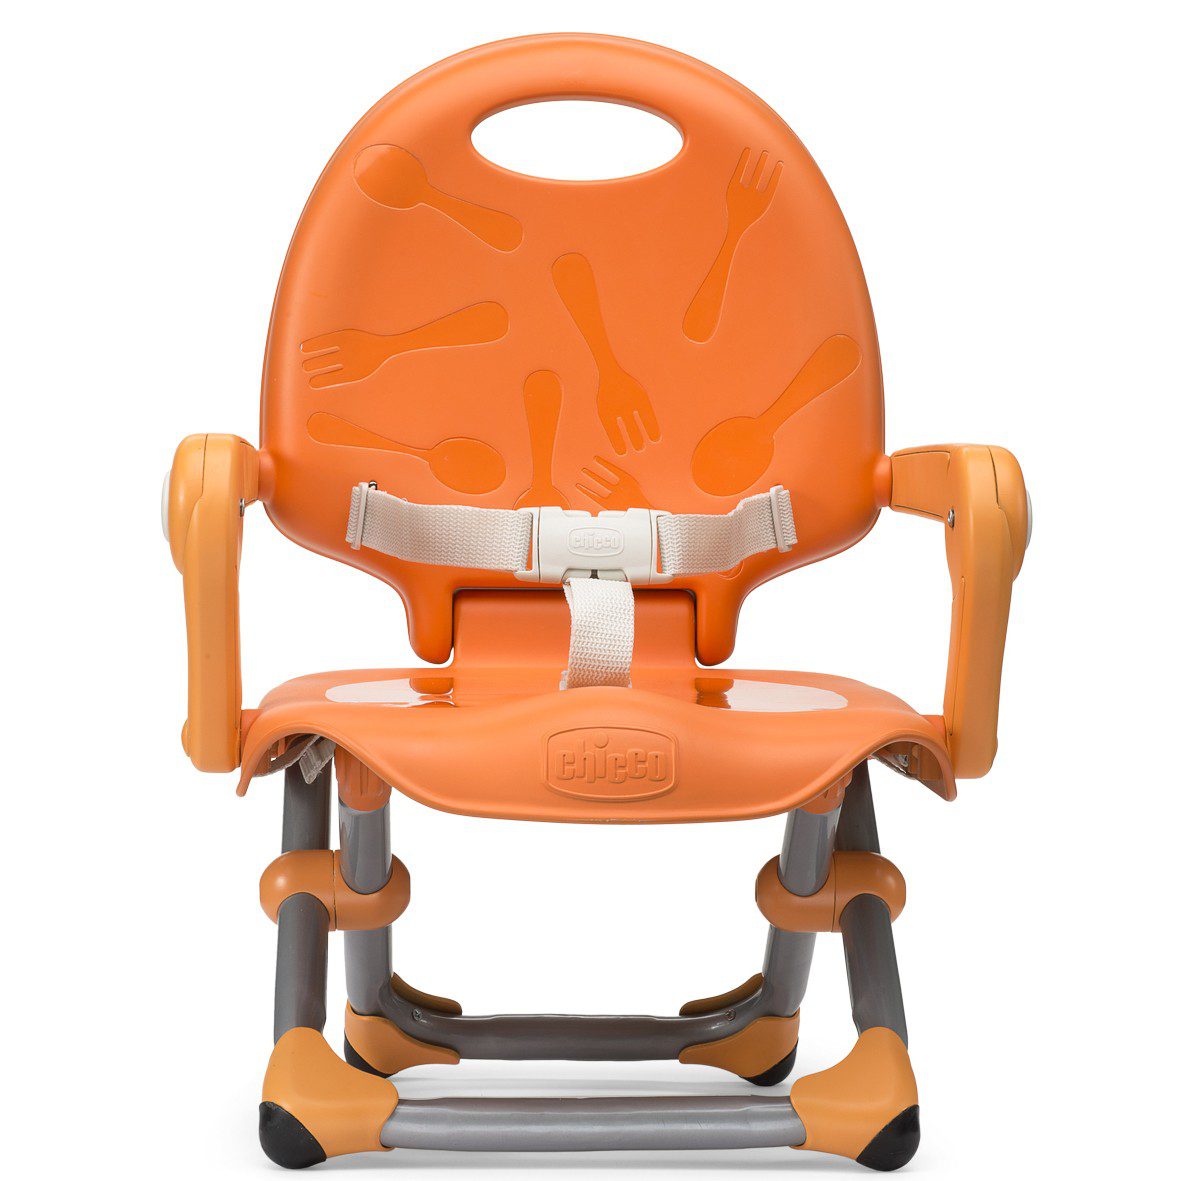 https://chicco.co.th/wp-content/uploads/2021/04/CH410793404000-CHICCO-POCKET-SNACK-BOOSTER-SEAT-%E0%B8%A3%E0%B8%A7%E0%B8%A1-6.jpg